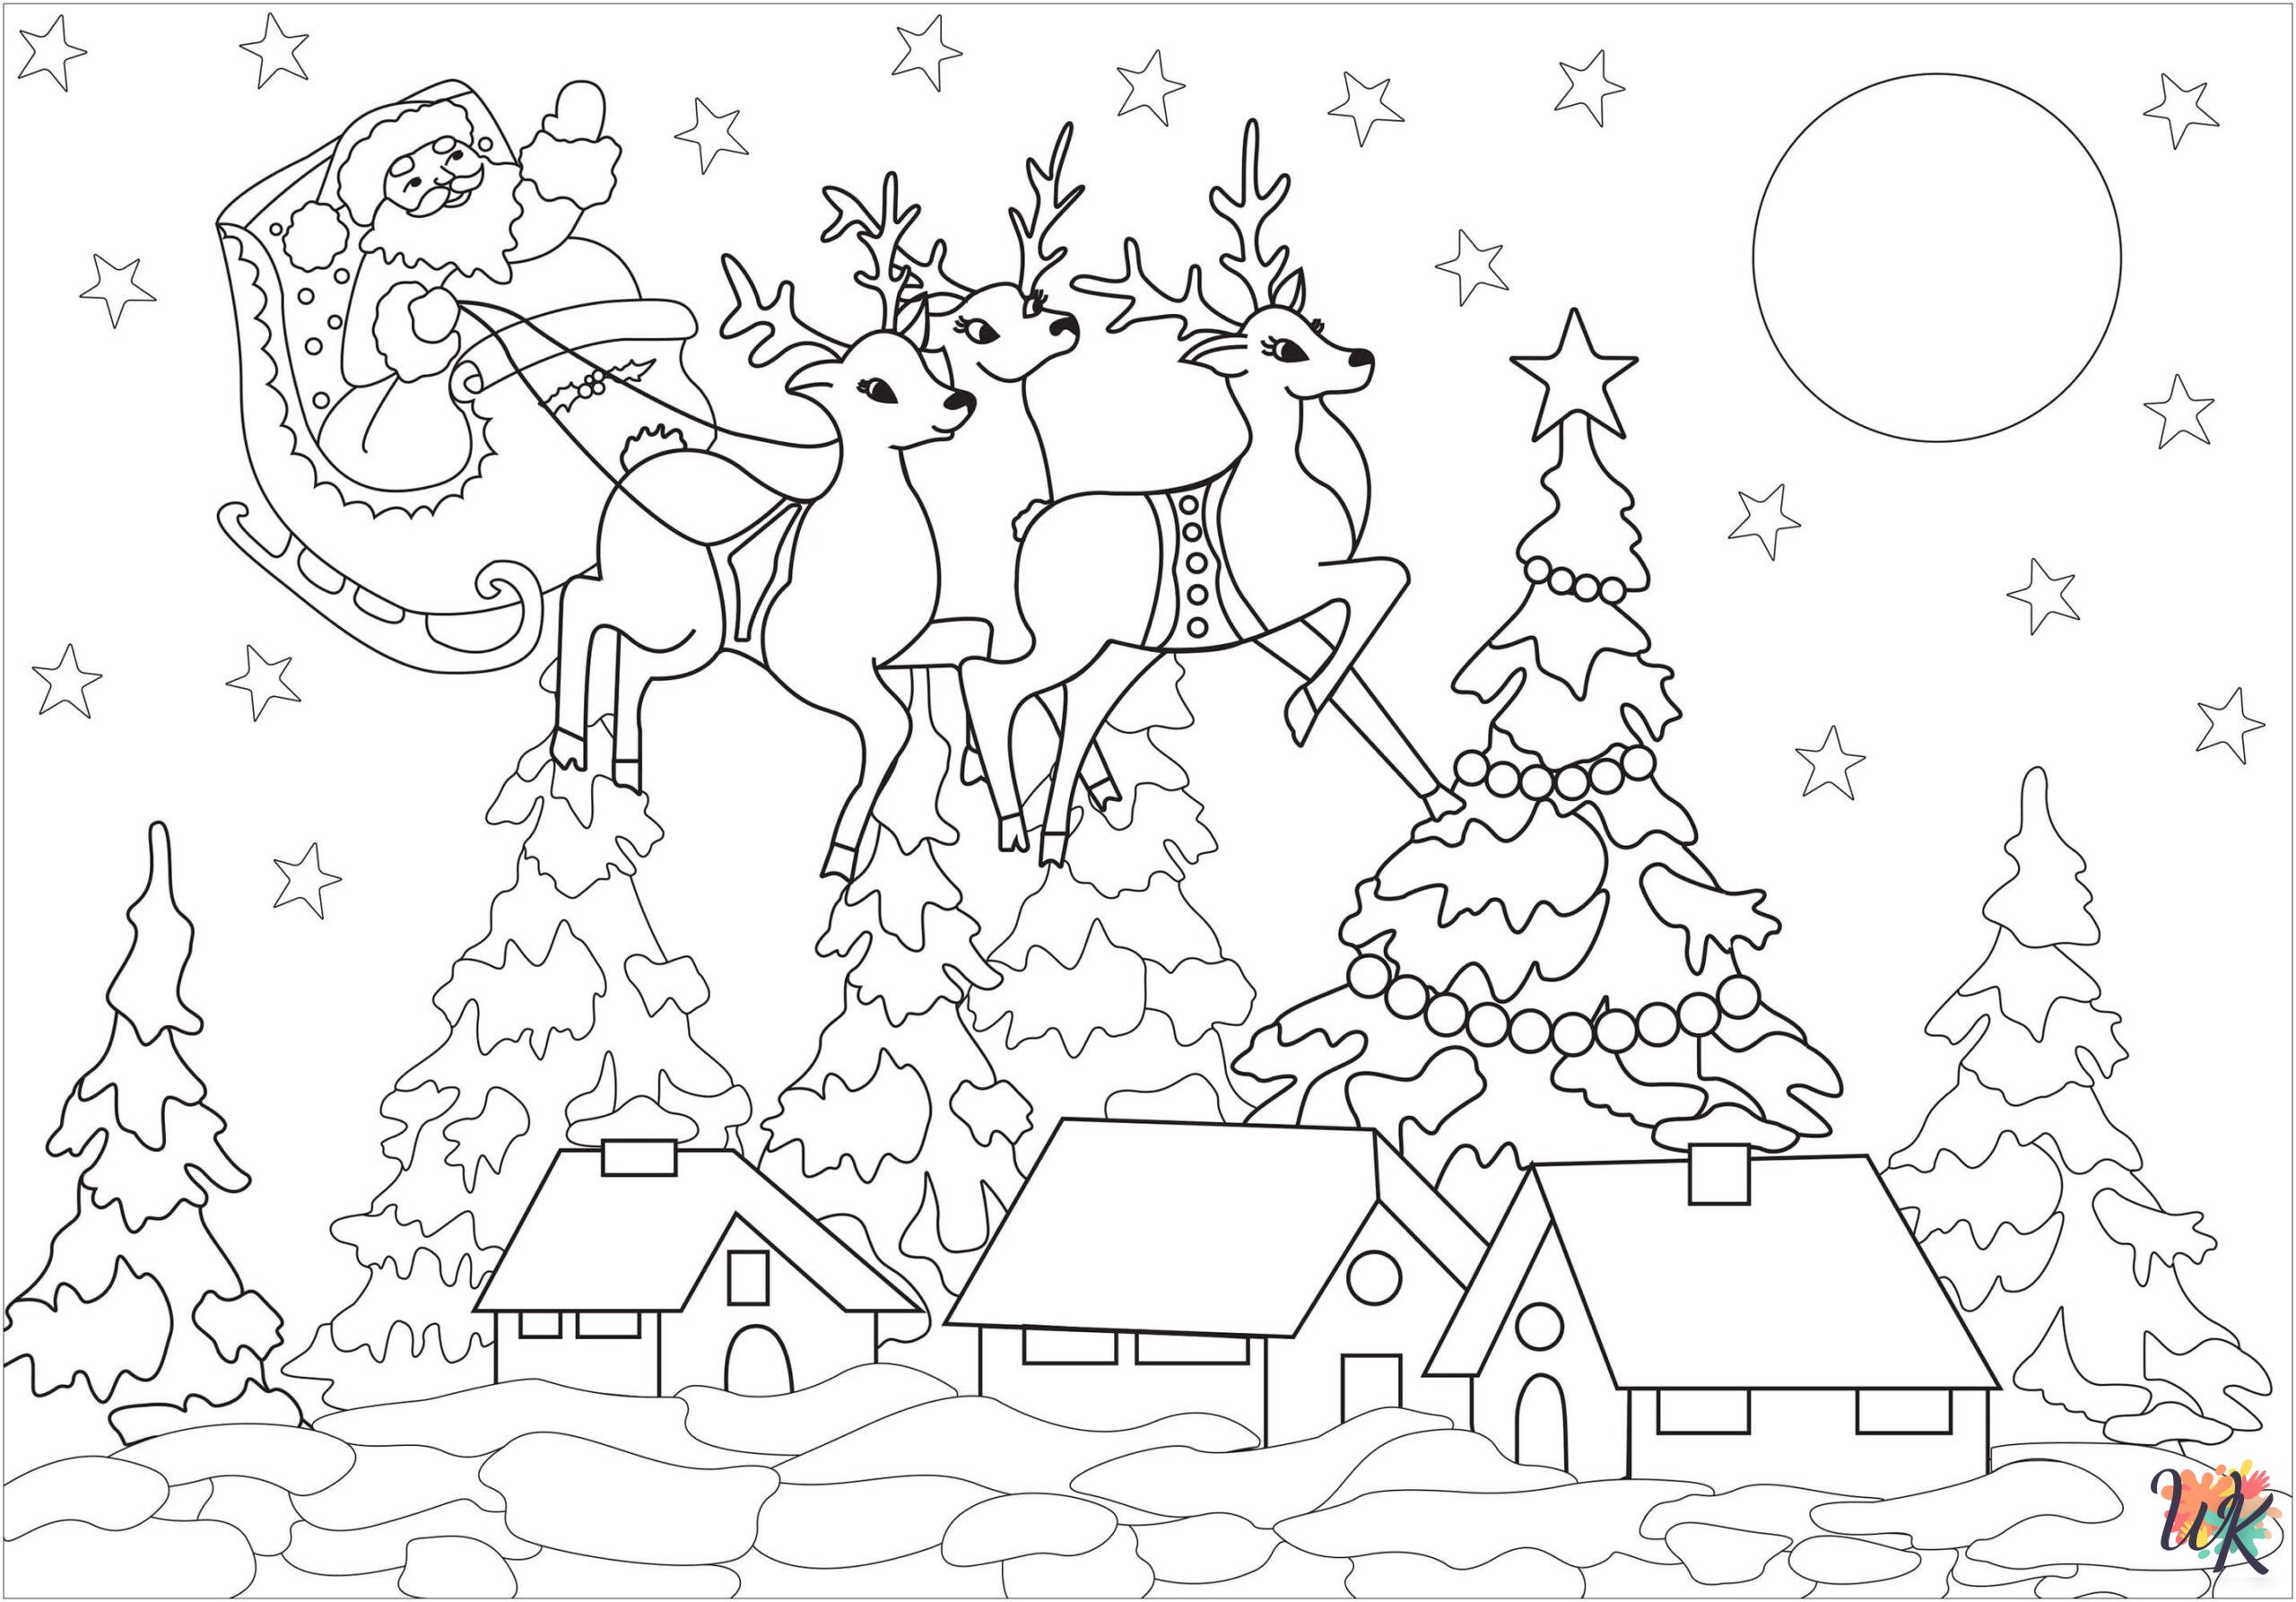 Santa coloring pages for kids